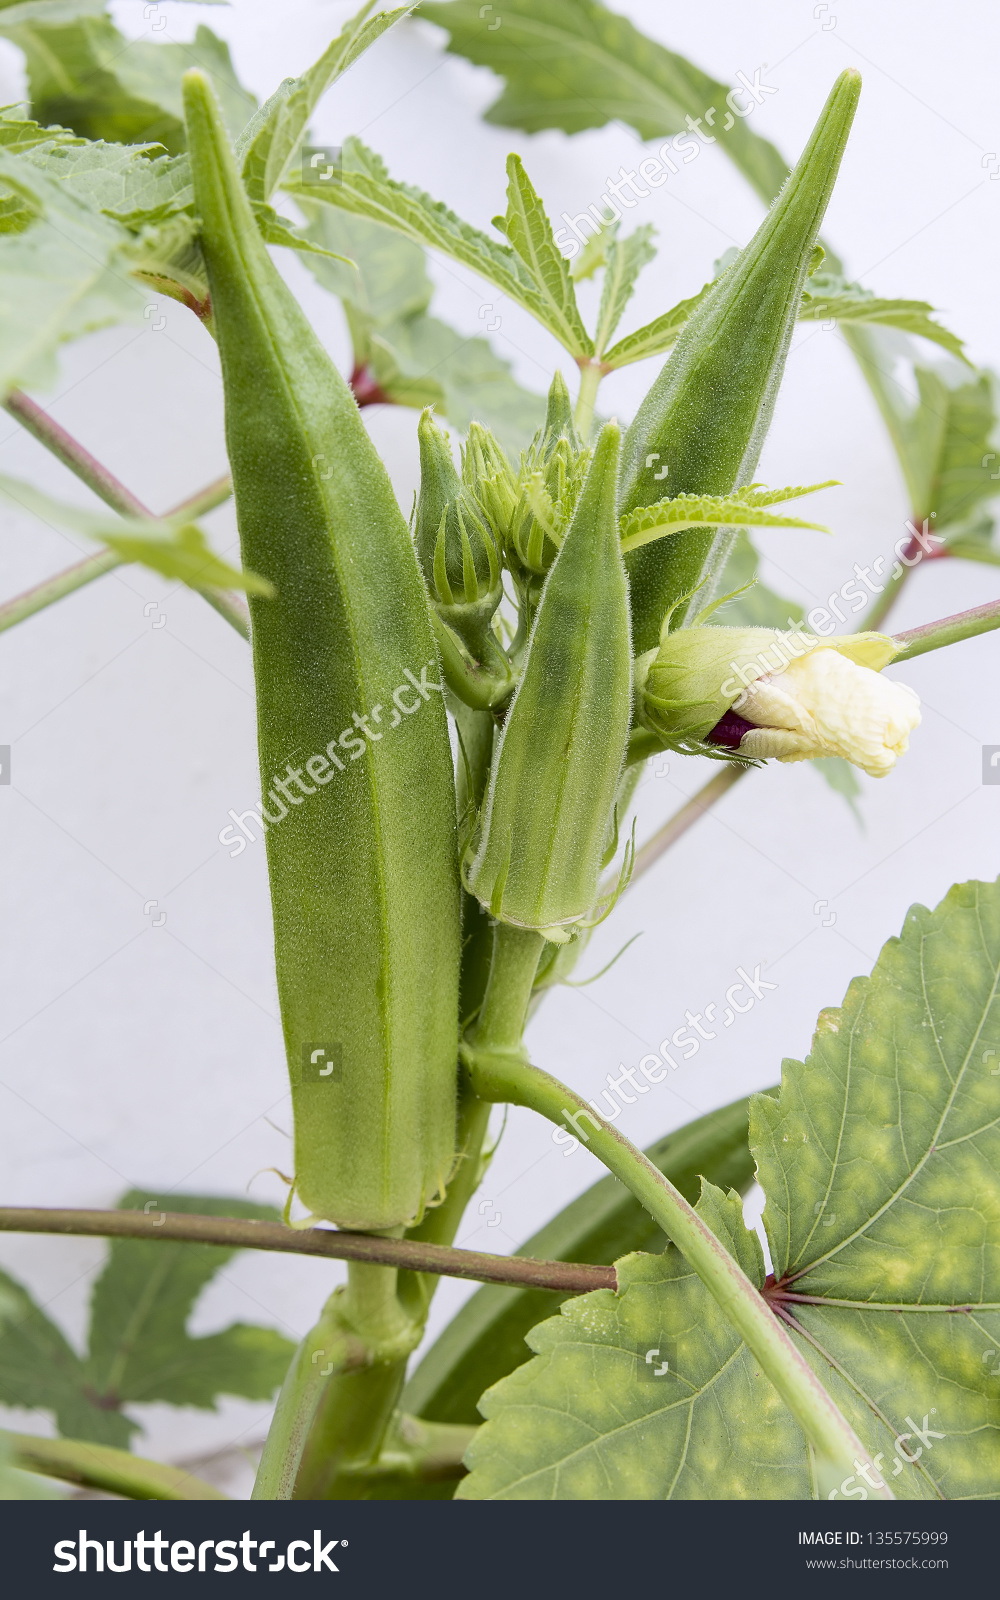 Okra Flowering Plant With Seed Pods And Flower Buds Closeup Stock.